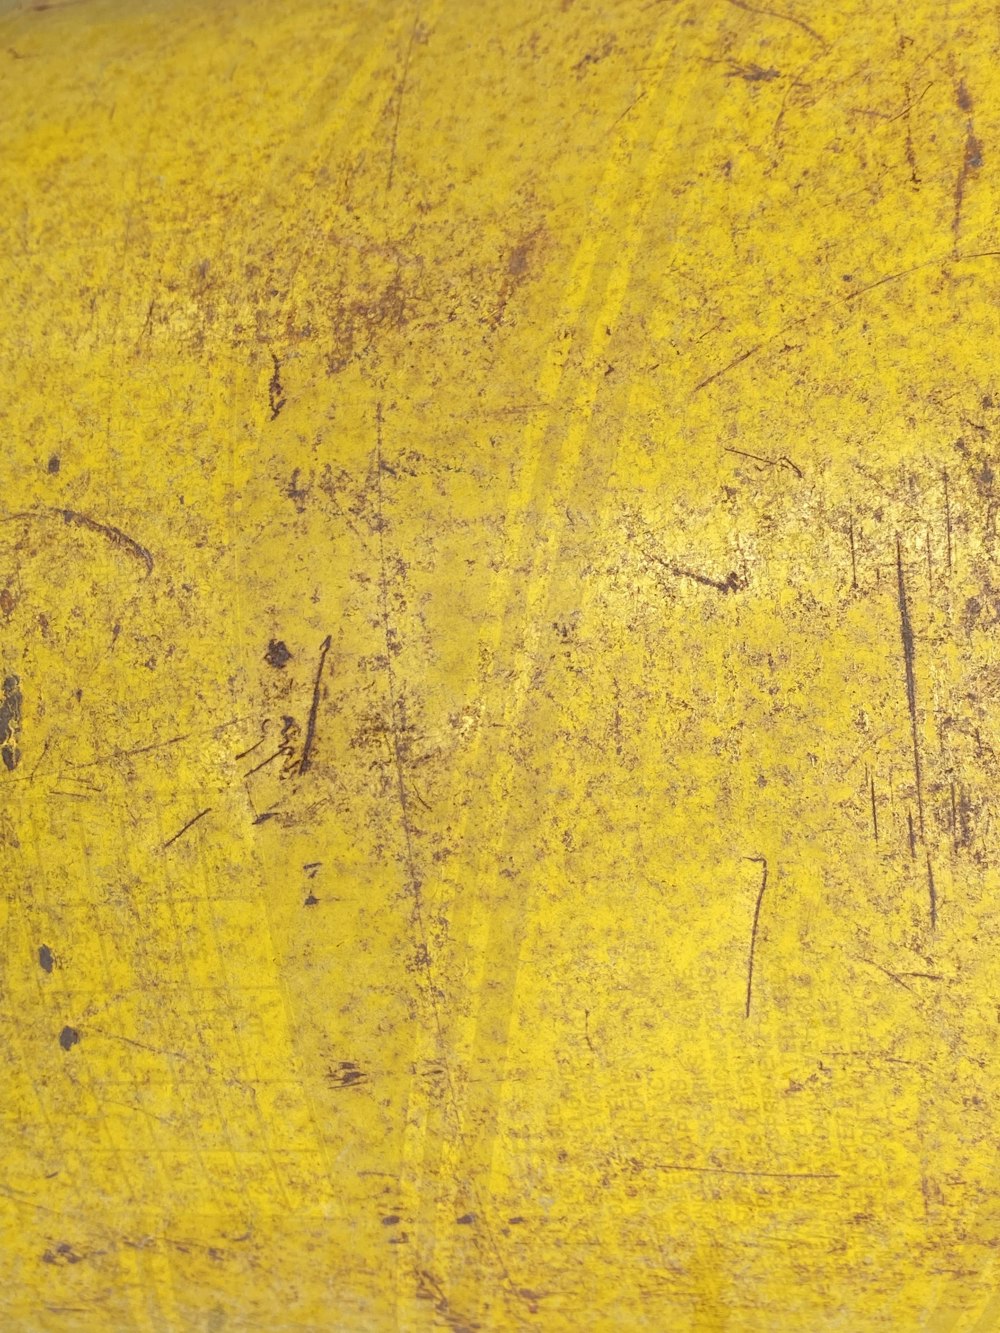 a close up of a yellow object with writing on it